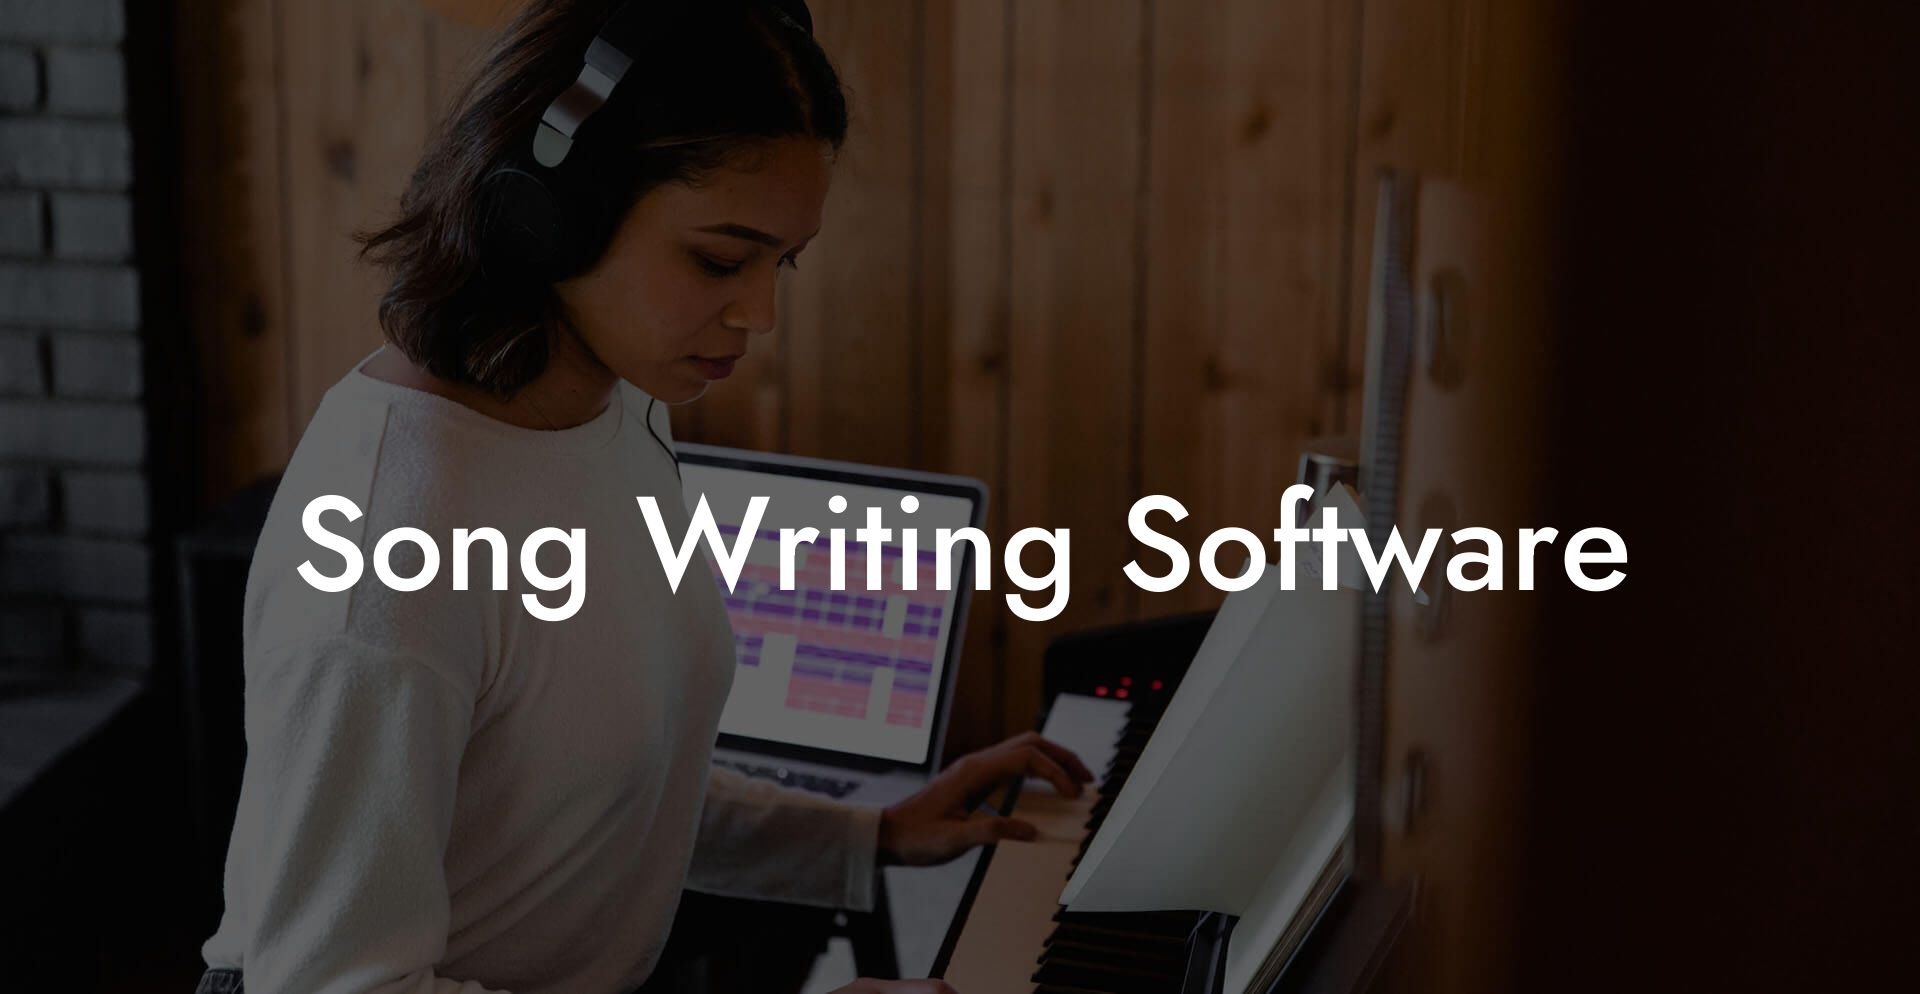 song writing software lyric assistant